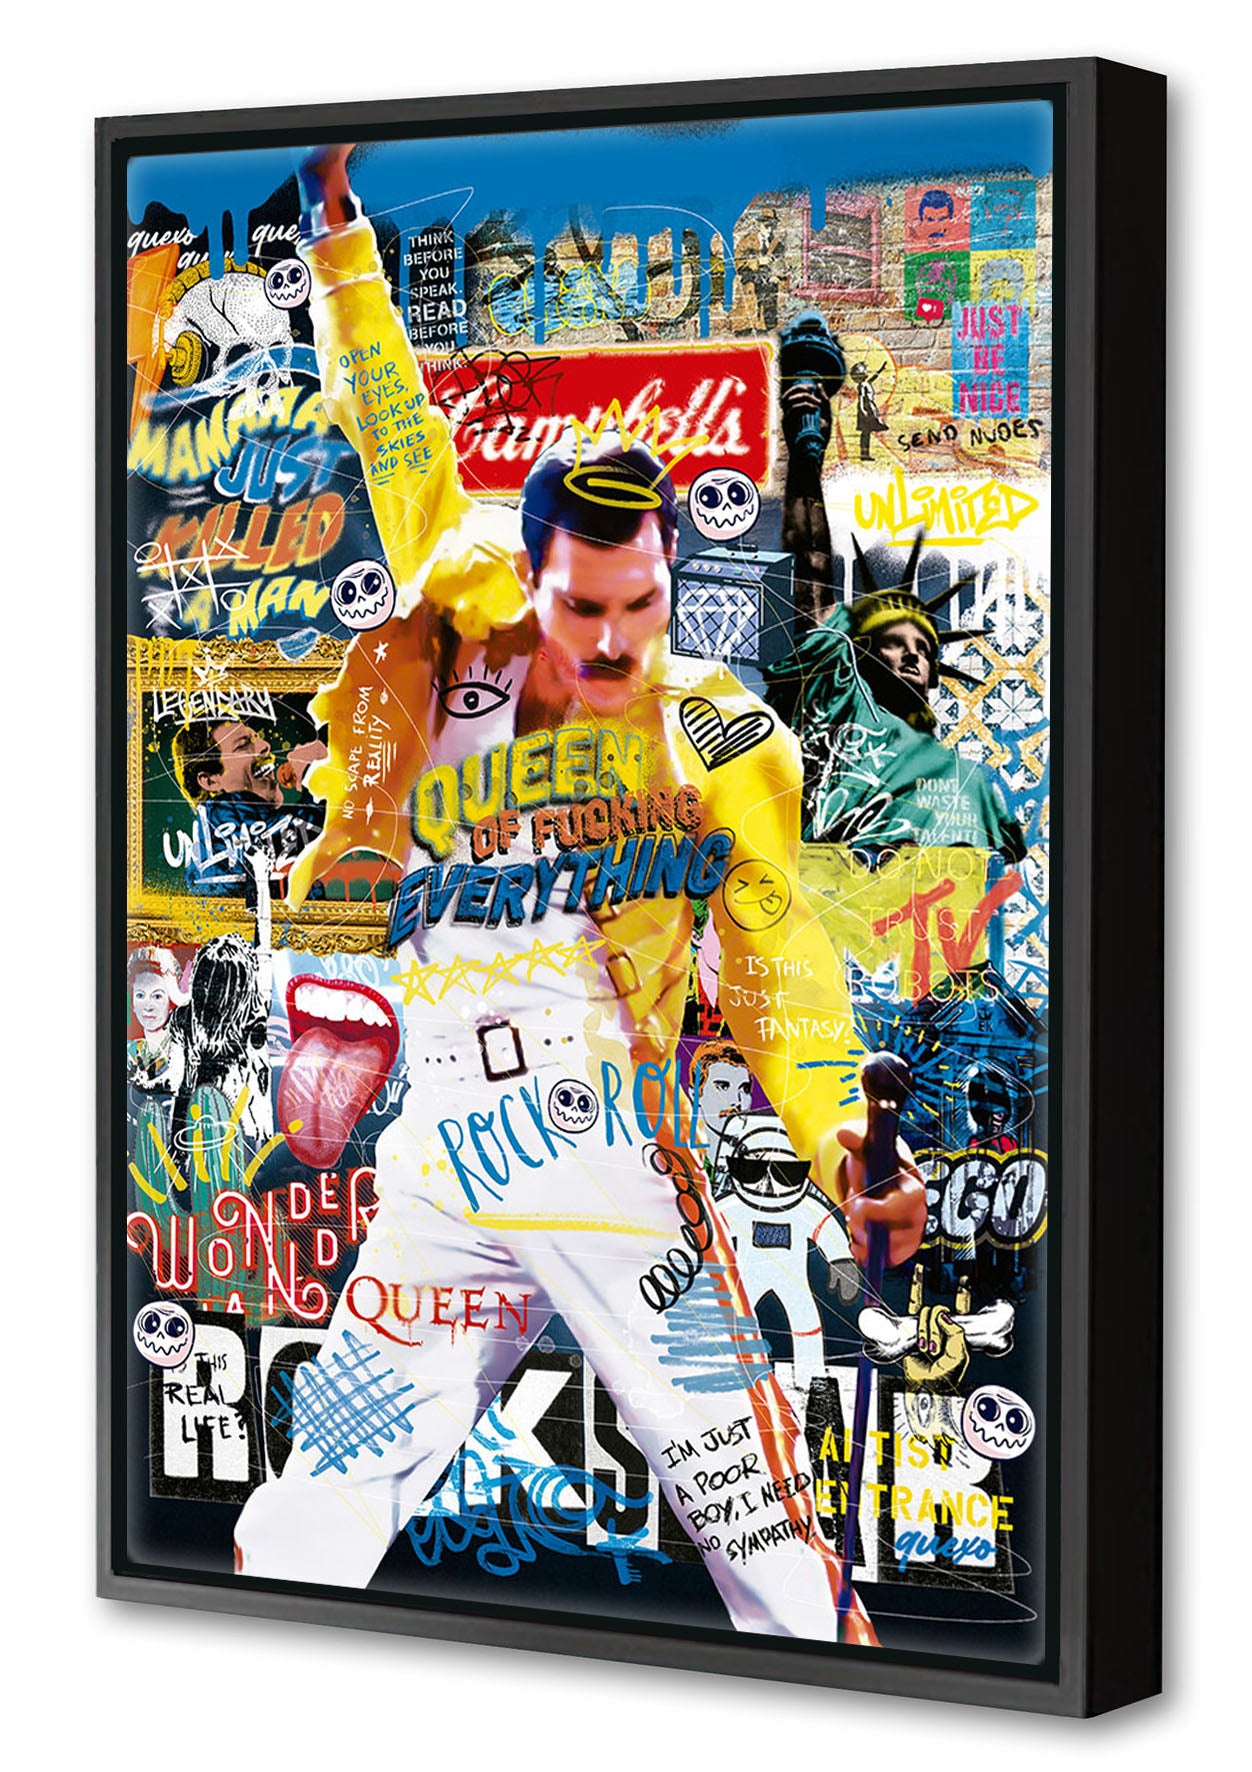 Queen of Fuc#1ng Everything-print, ricardo-noble-Canvas Print with Box Frame-40 x 60 cm-BLUE SHAKER